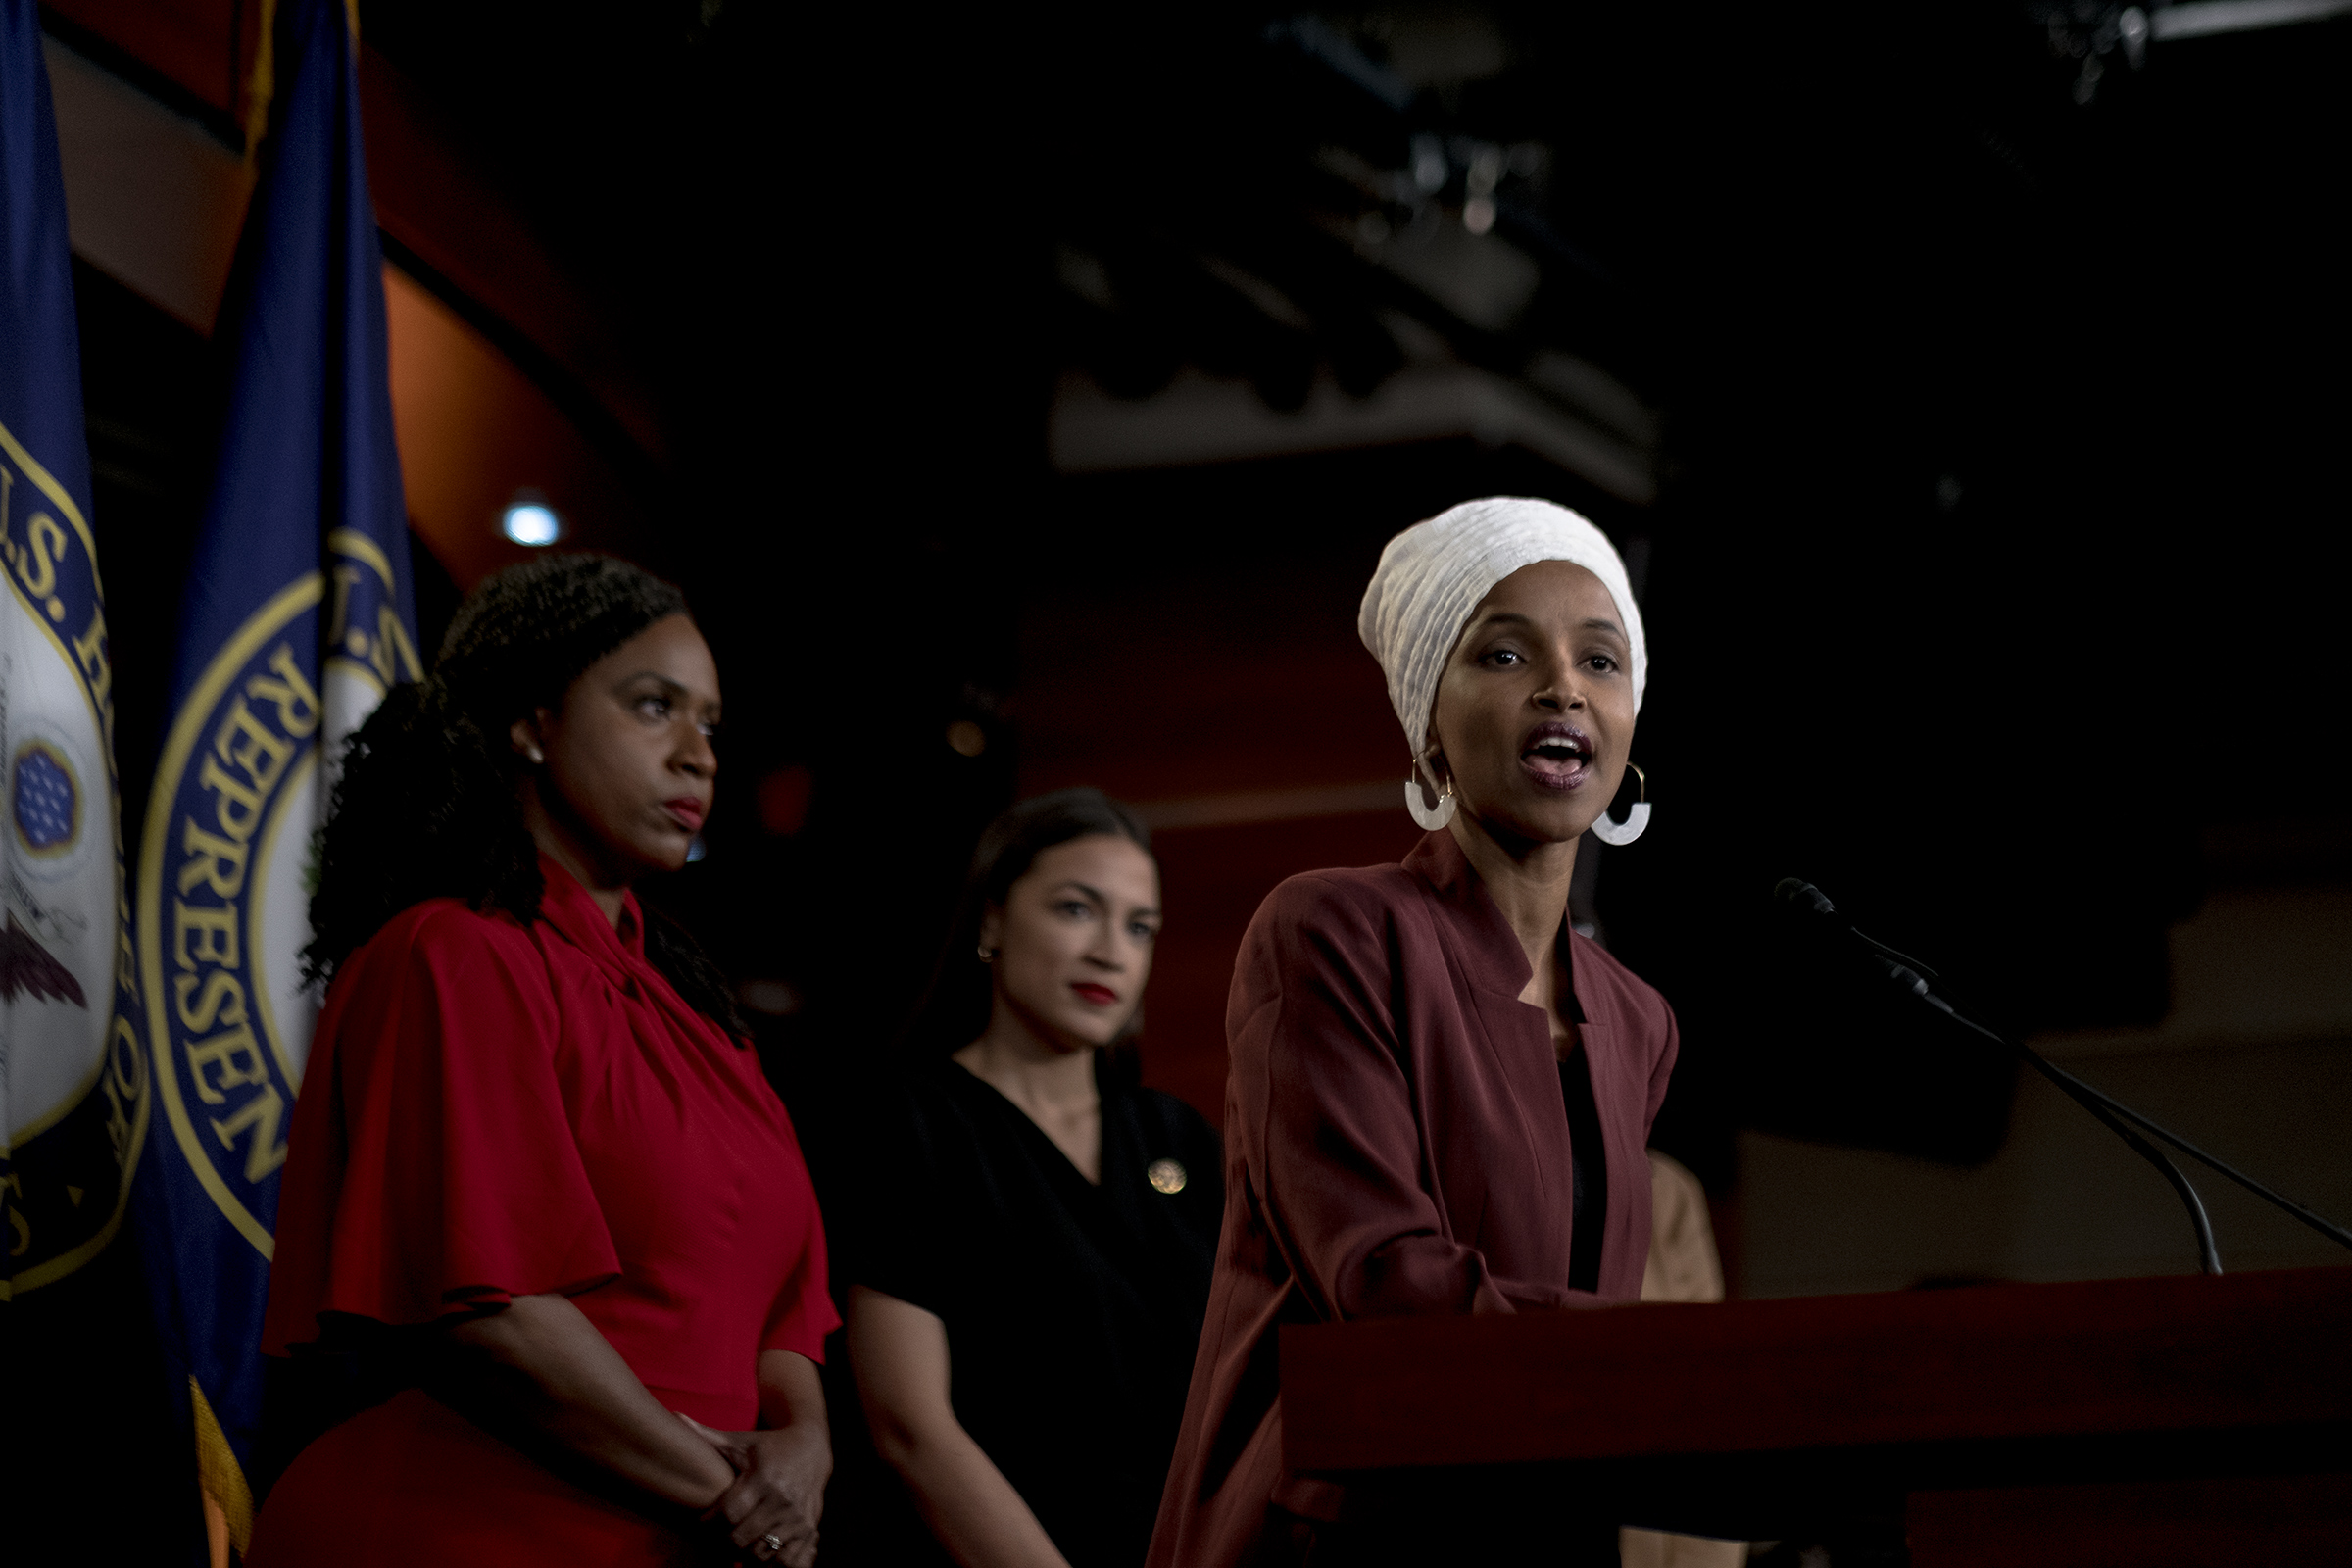 Omar speaks at a press conference following Trump's racist Twitter attack on July 15, 2019. (Gabriella Demczuk for TIME)